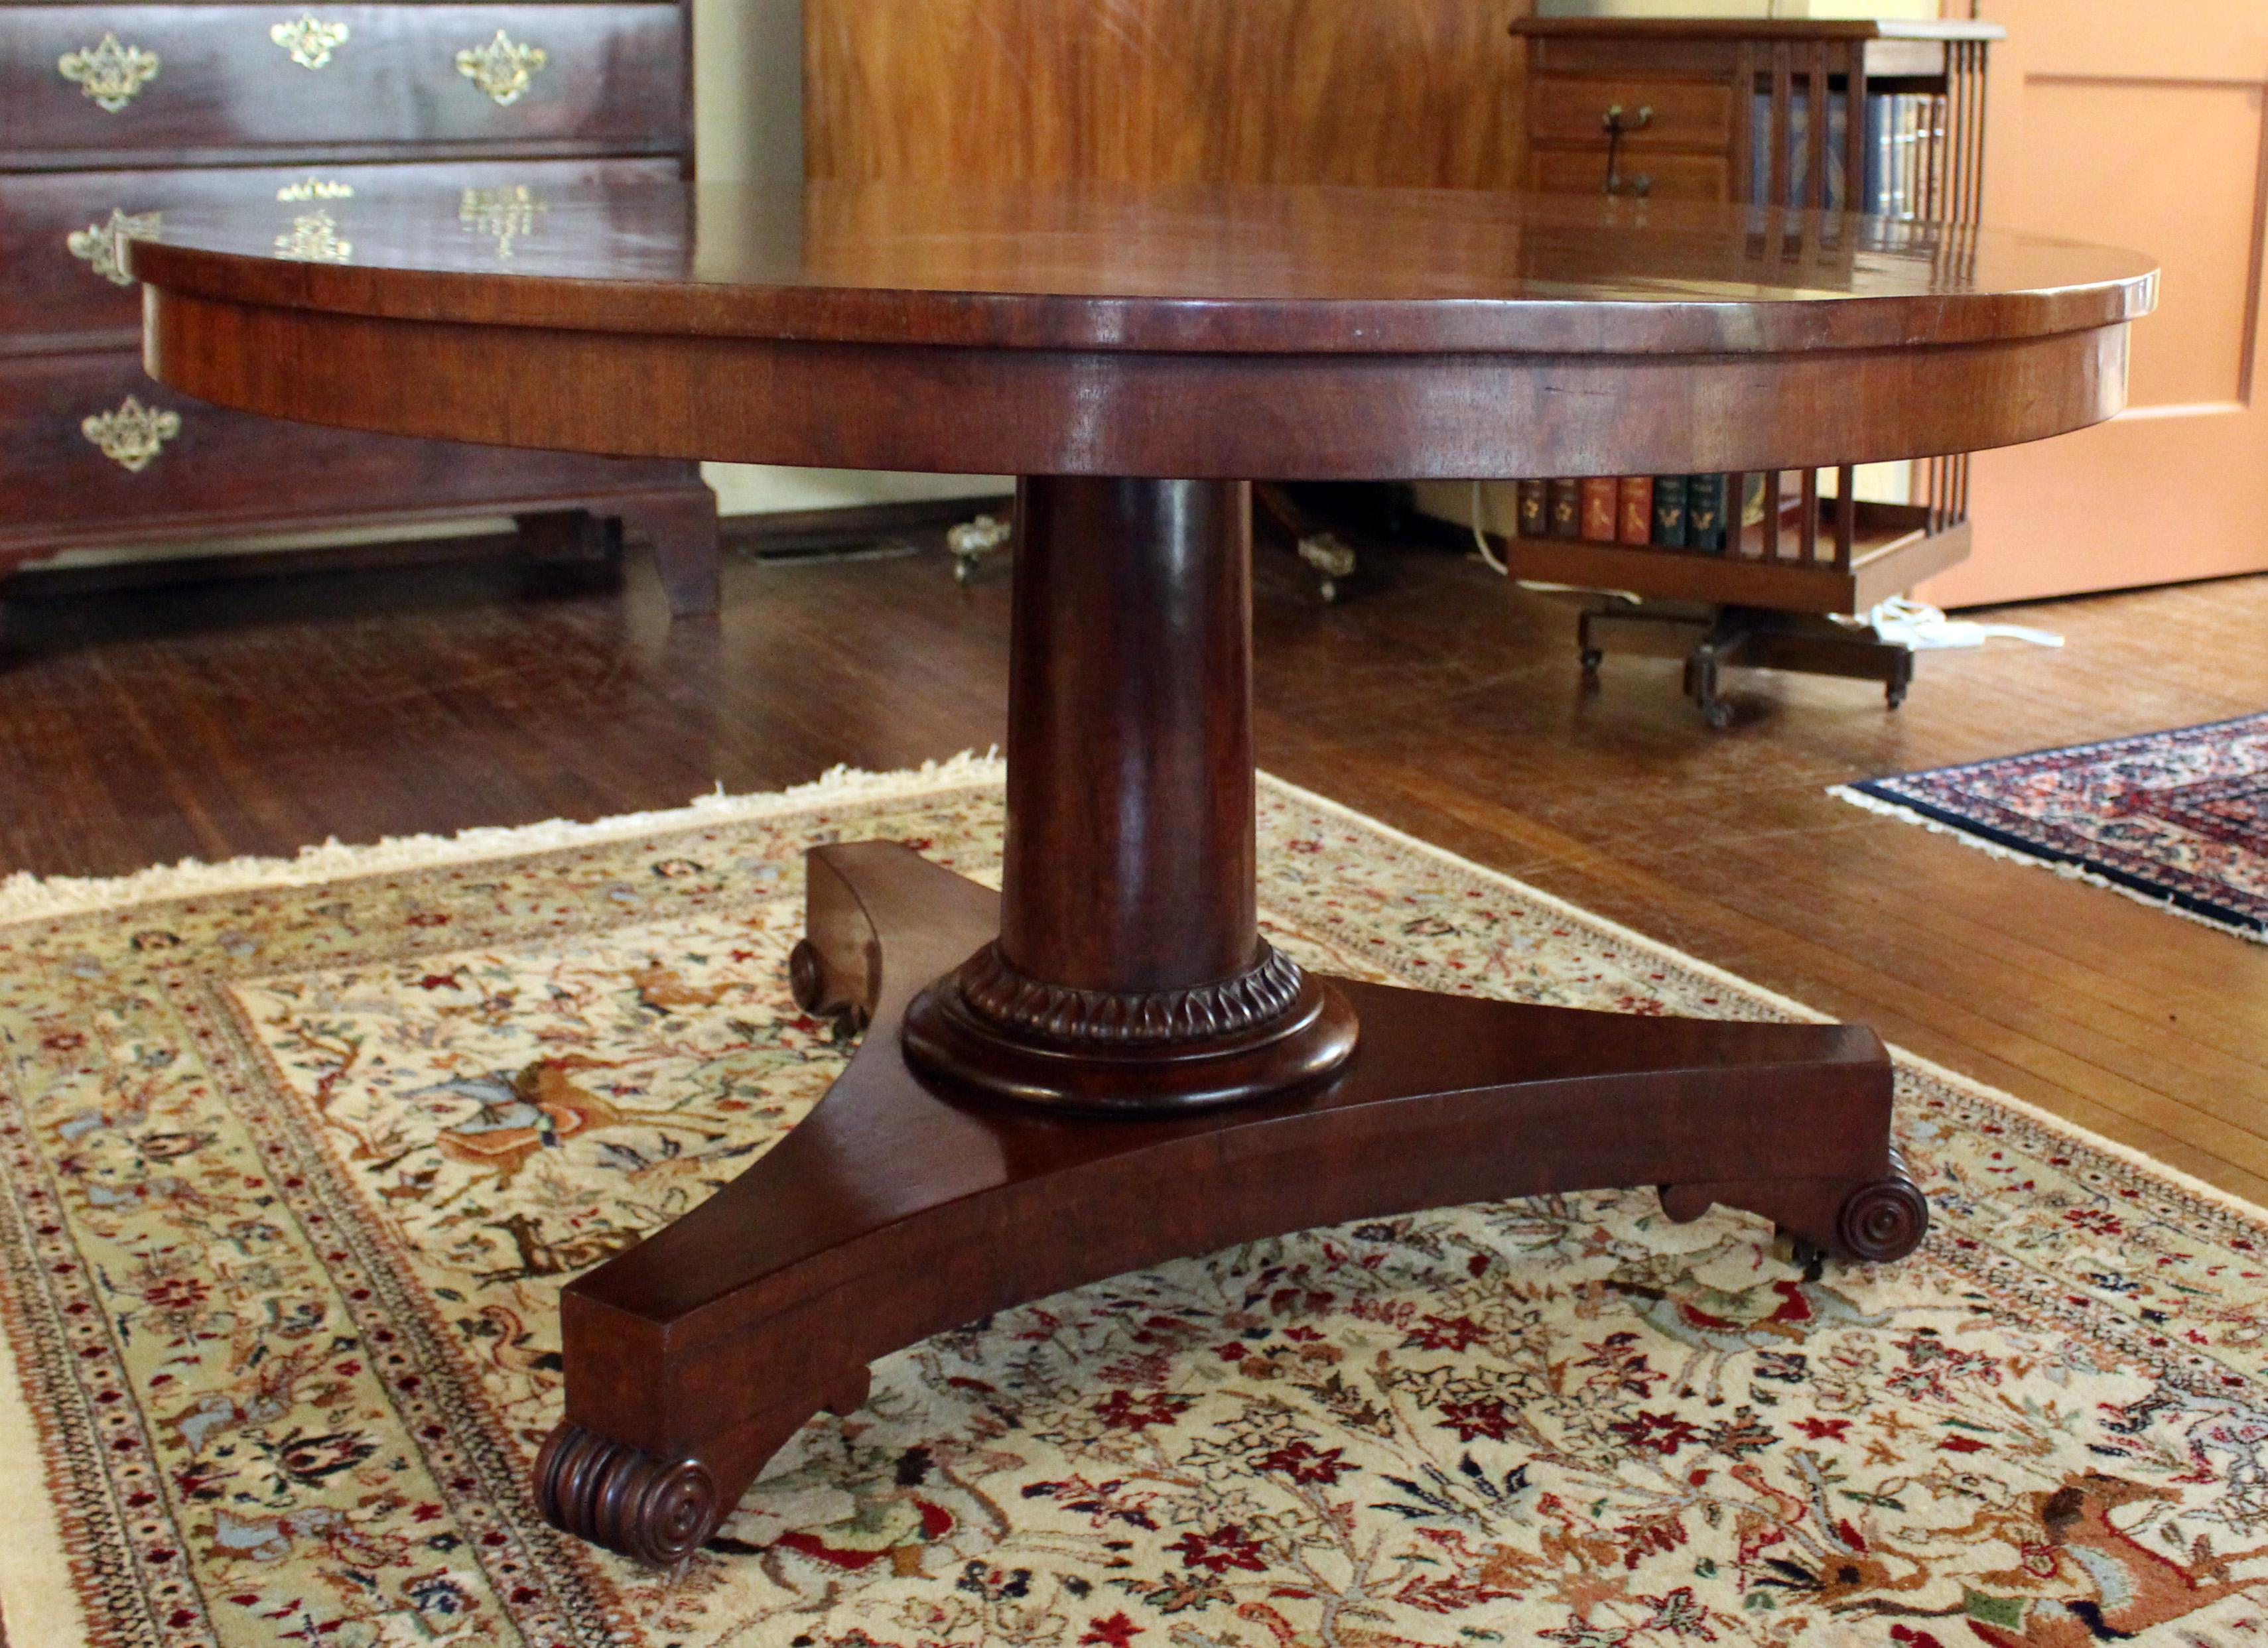 Early 19th century Regency to George IV tilt-top center table or loo table. Stamped Gillows. English. Mahogany. Plum pudding mahogany top of great figure. Rich mahogany base with acanthus ring carving. Tripod base raised on rosette accented,